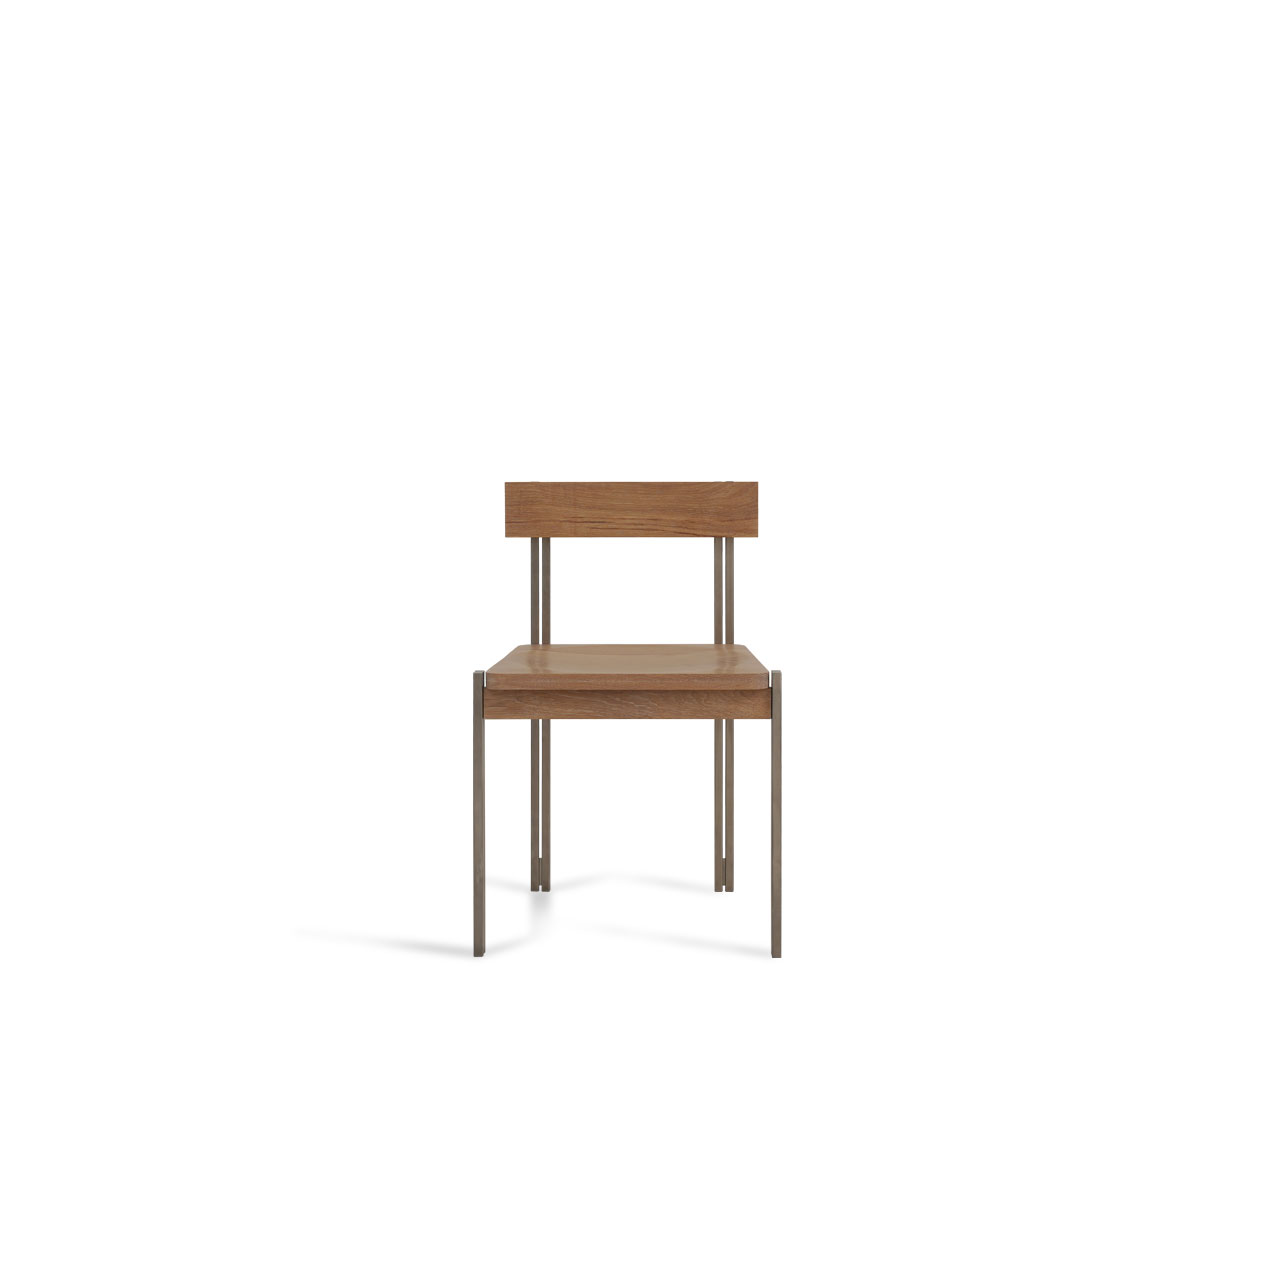 SUITE 2.0 Chair